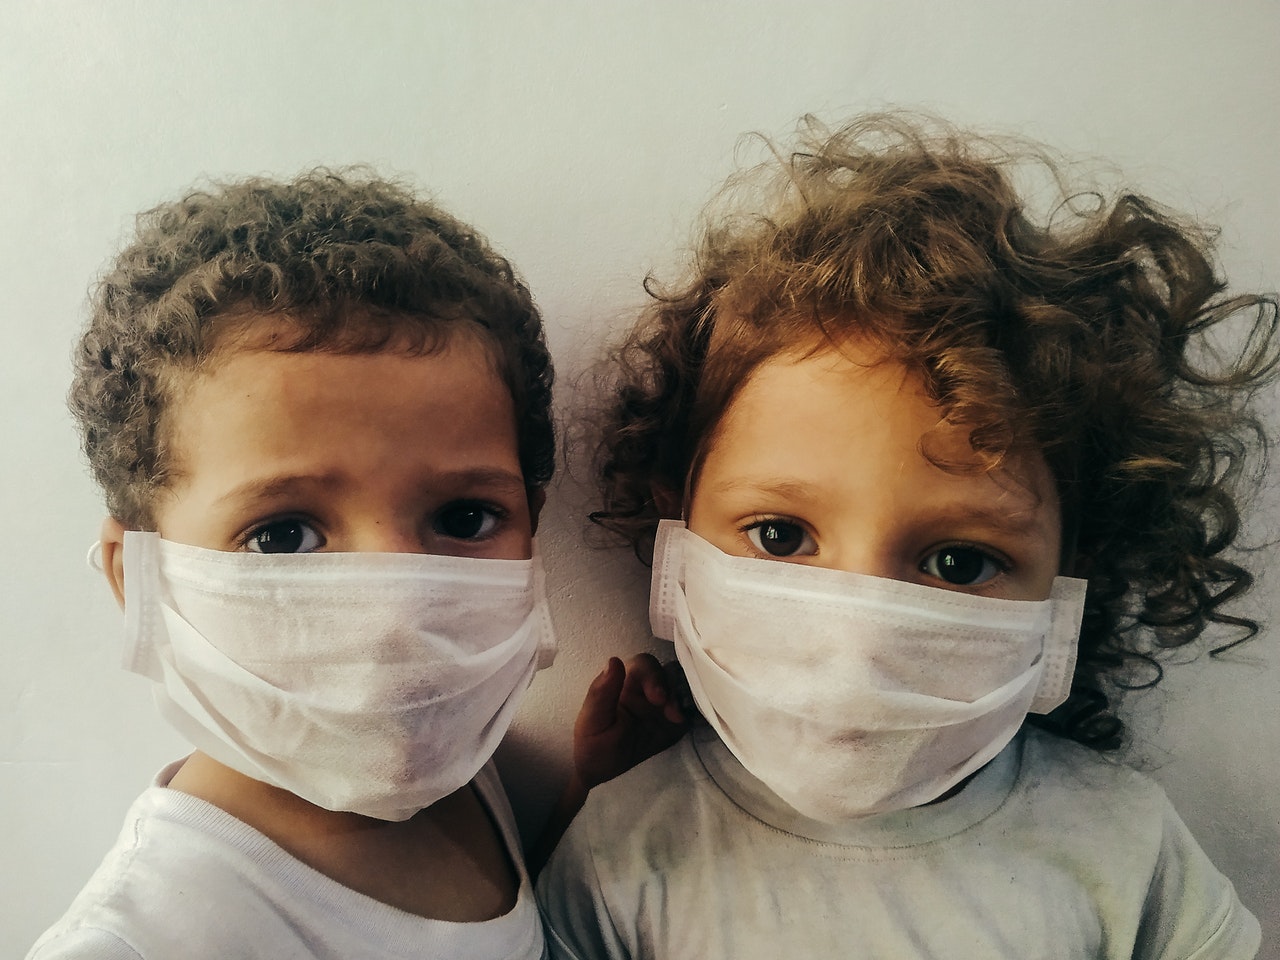 I'm Fully Vaccinated – Should I Keep Wearing A Mask For My Unvaccinated Child?